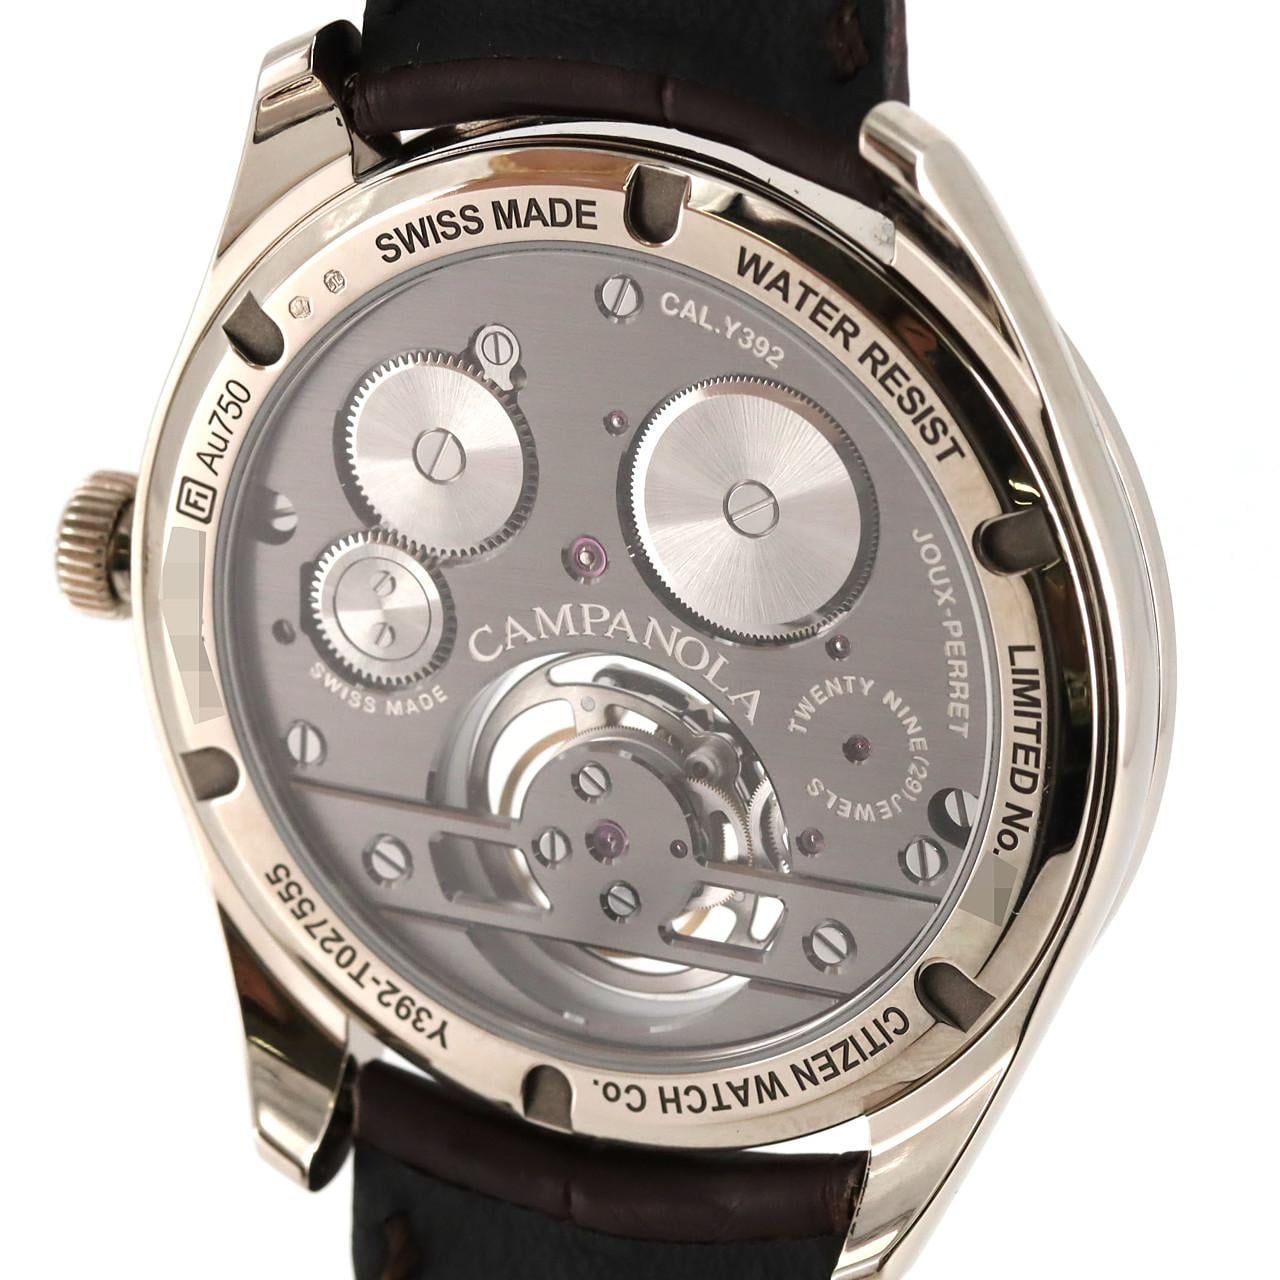 CITIZEN Campanola Flying Tourbillon WG LIMITED Y392-T027555/NZ3000-19P WG Manual Winding